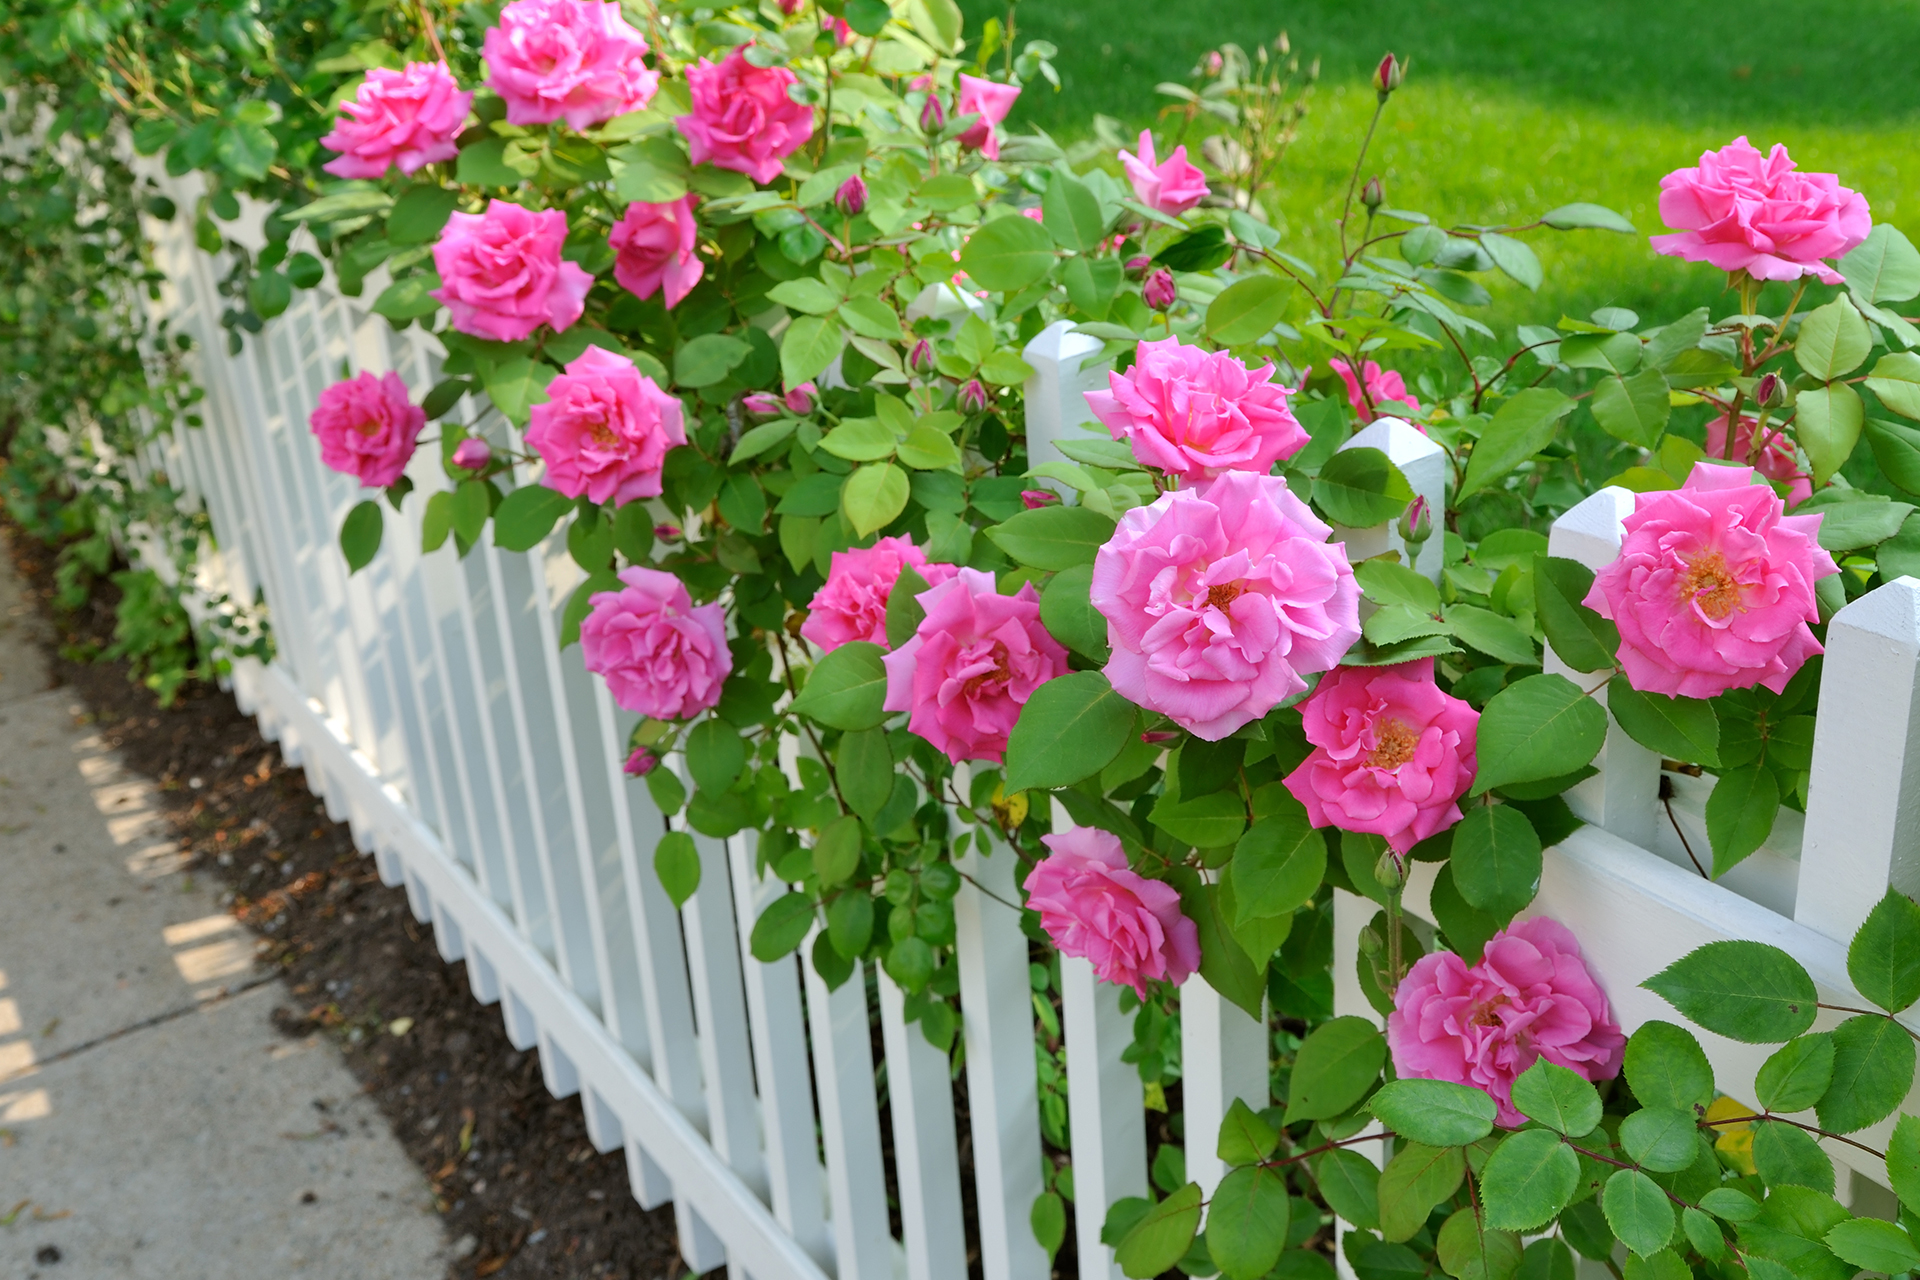 a decorative type of garden fence